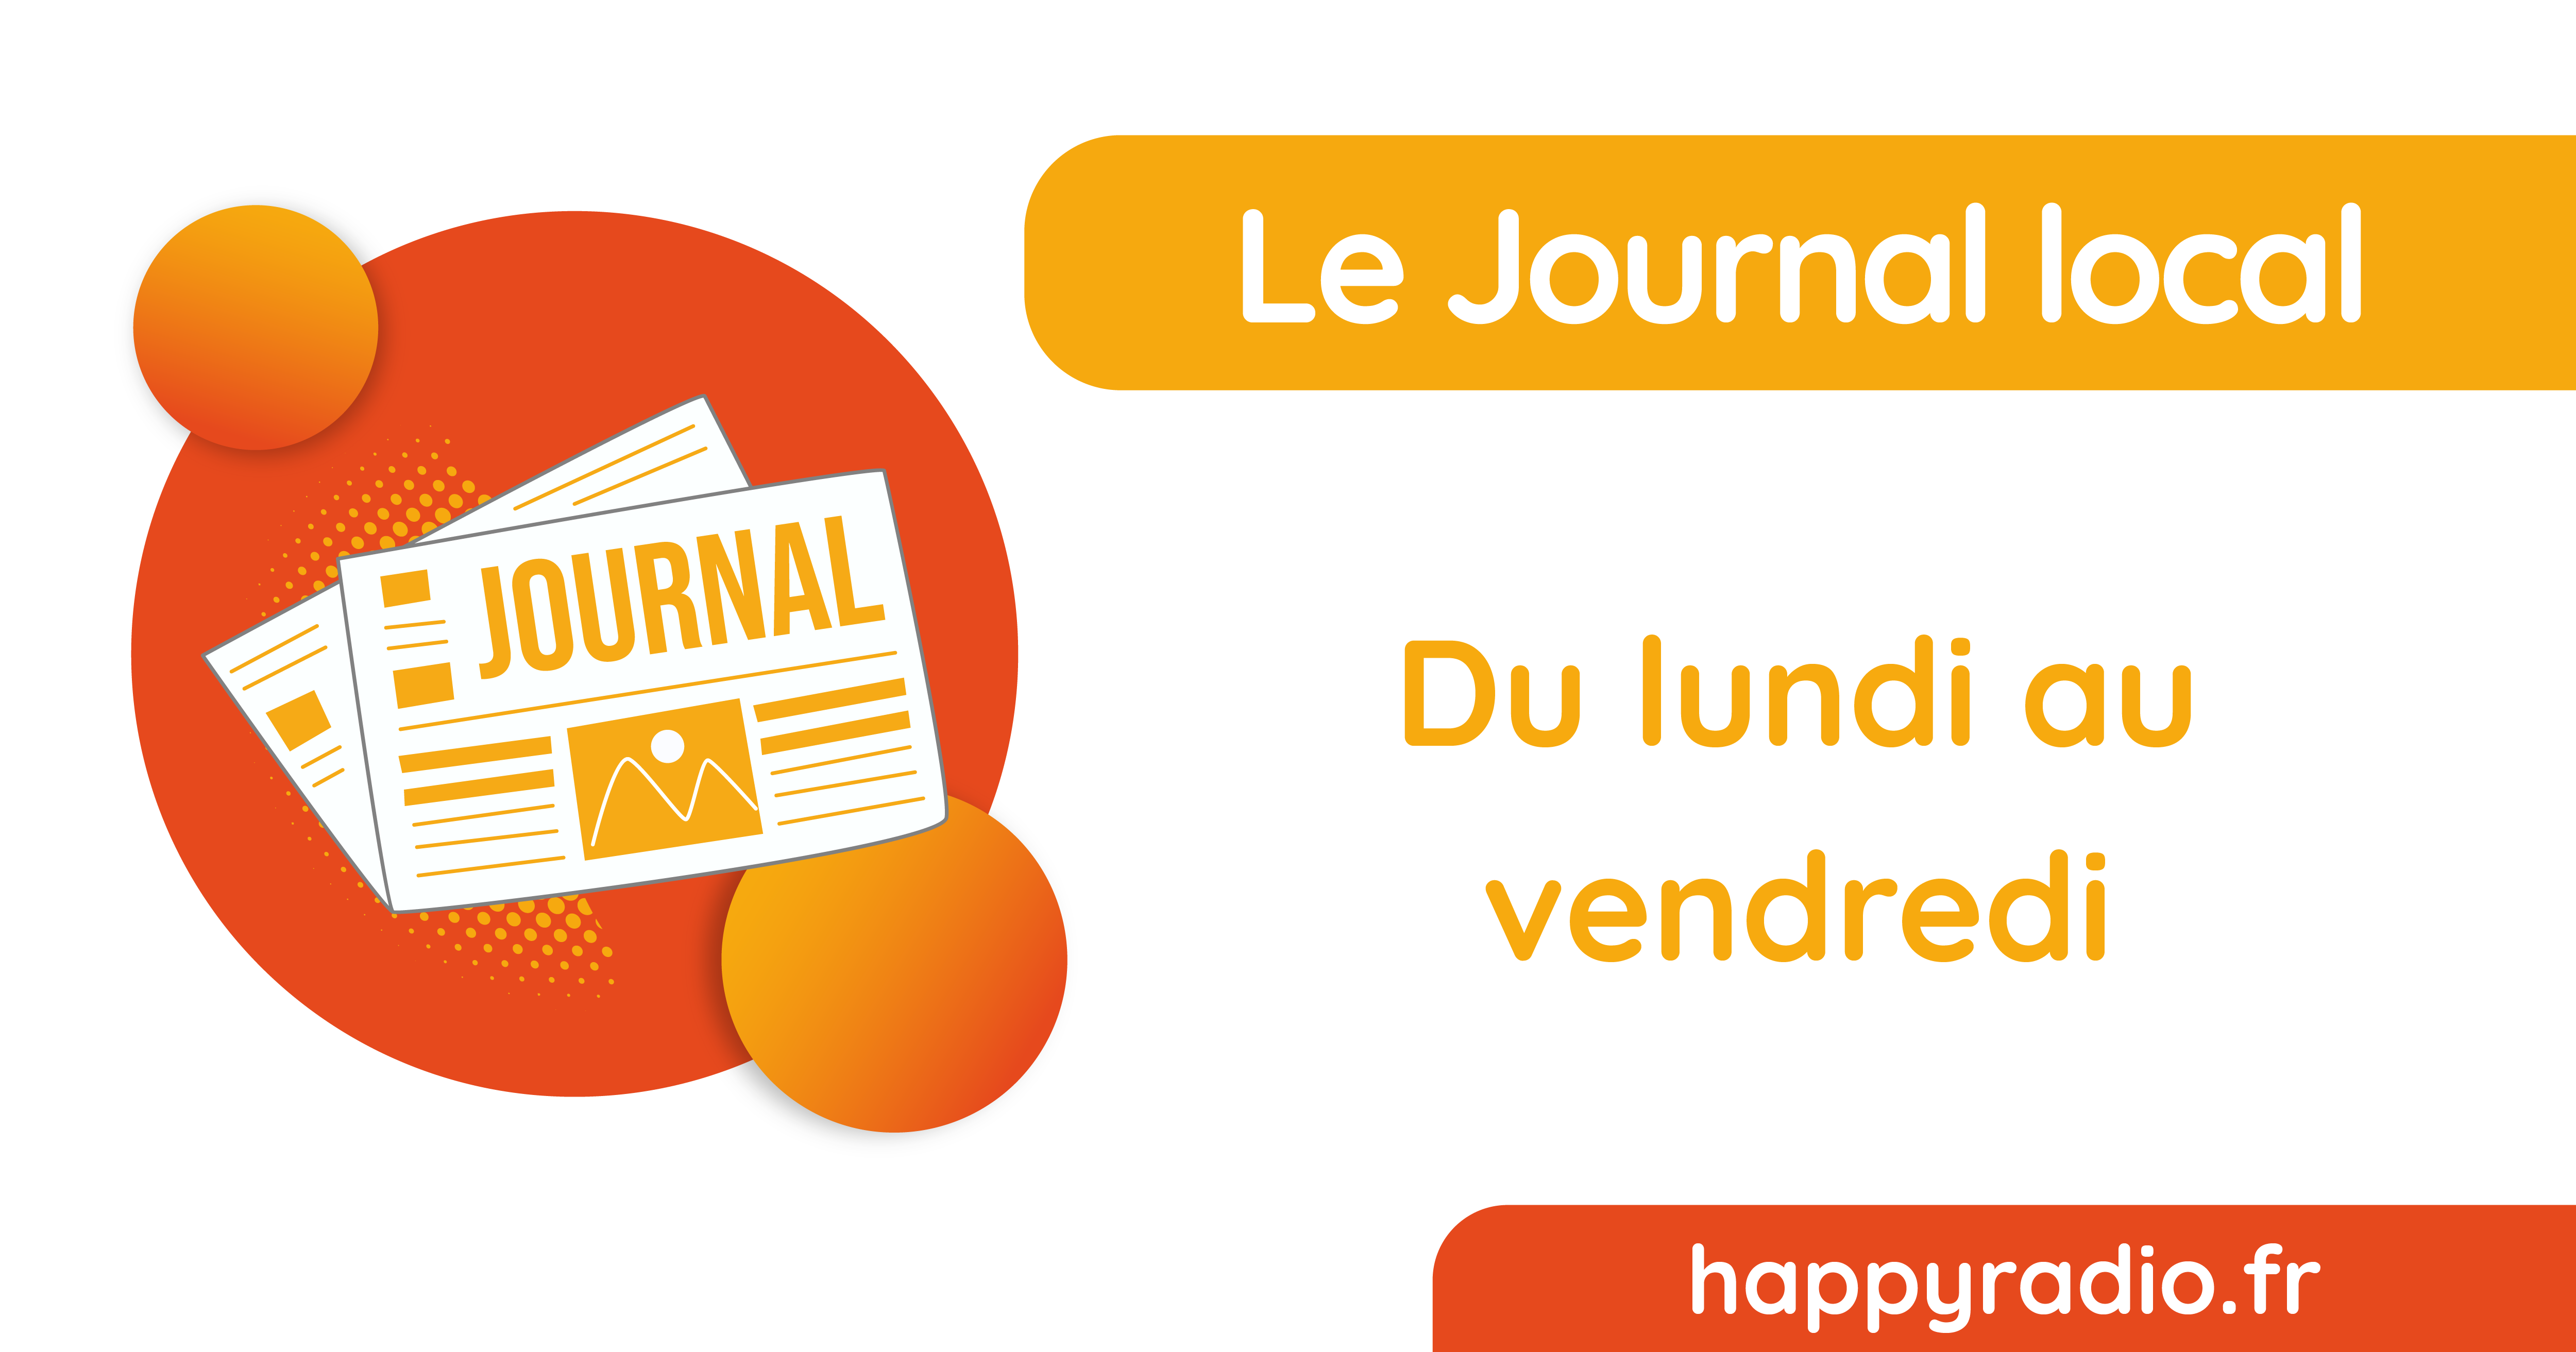 You are currently viewing Le journal du vendredi